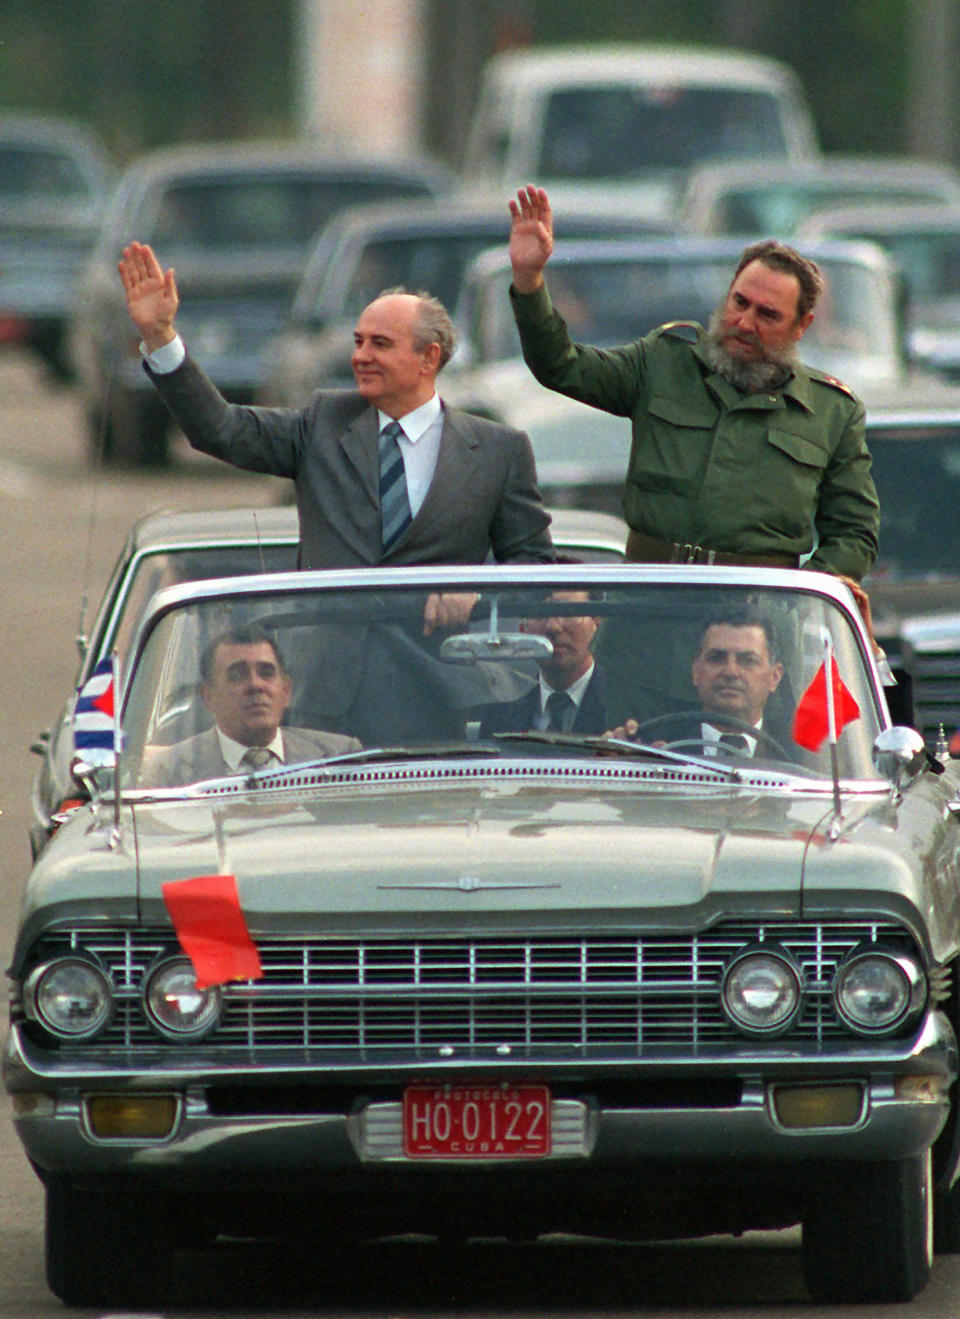 FILE - Cuban President Fidel Castro, right, and Soviet leader Mikhail Gorbachev wave to the crowd as their motorcade takes them through downtown Havana, Cuba, Monday, April 3, 1989. Russian news agencies are reporting that former Soviet President Mikhail Gorbachev has died at 91. The Tass, RIA Novosti and Interfax news agencies cited the Central Clinical Hospital. (AP Photo/Carlos Osorio, File)